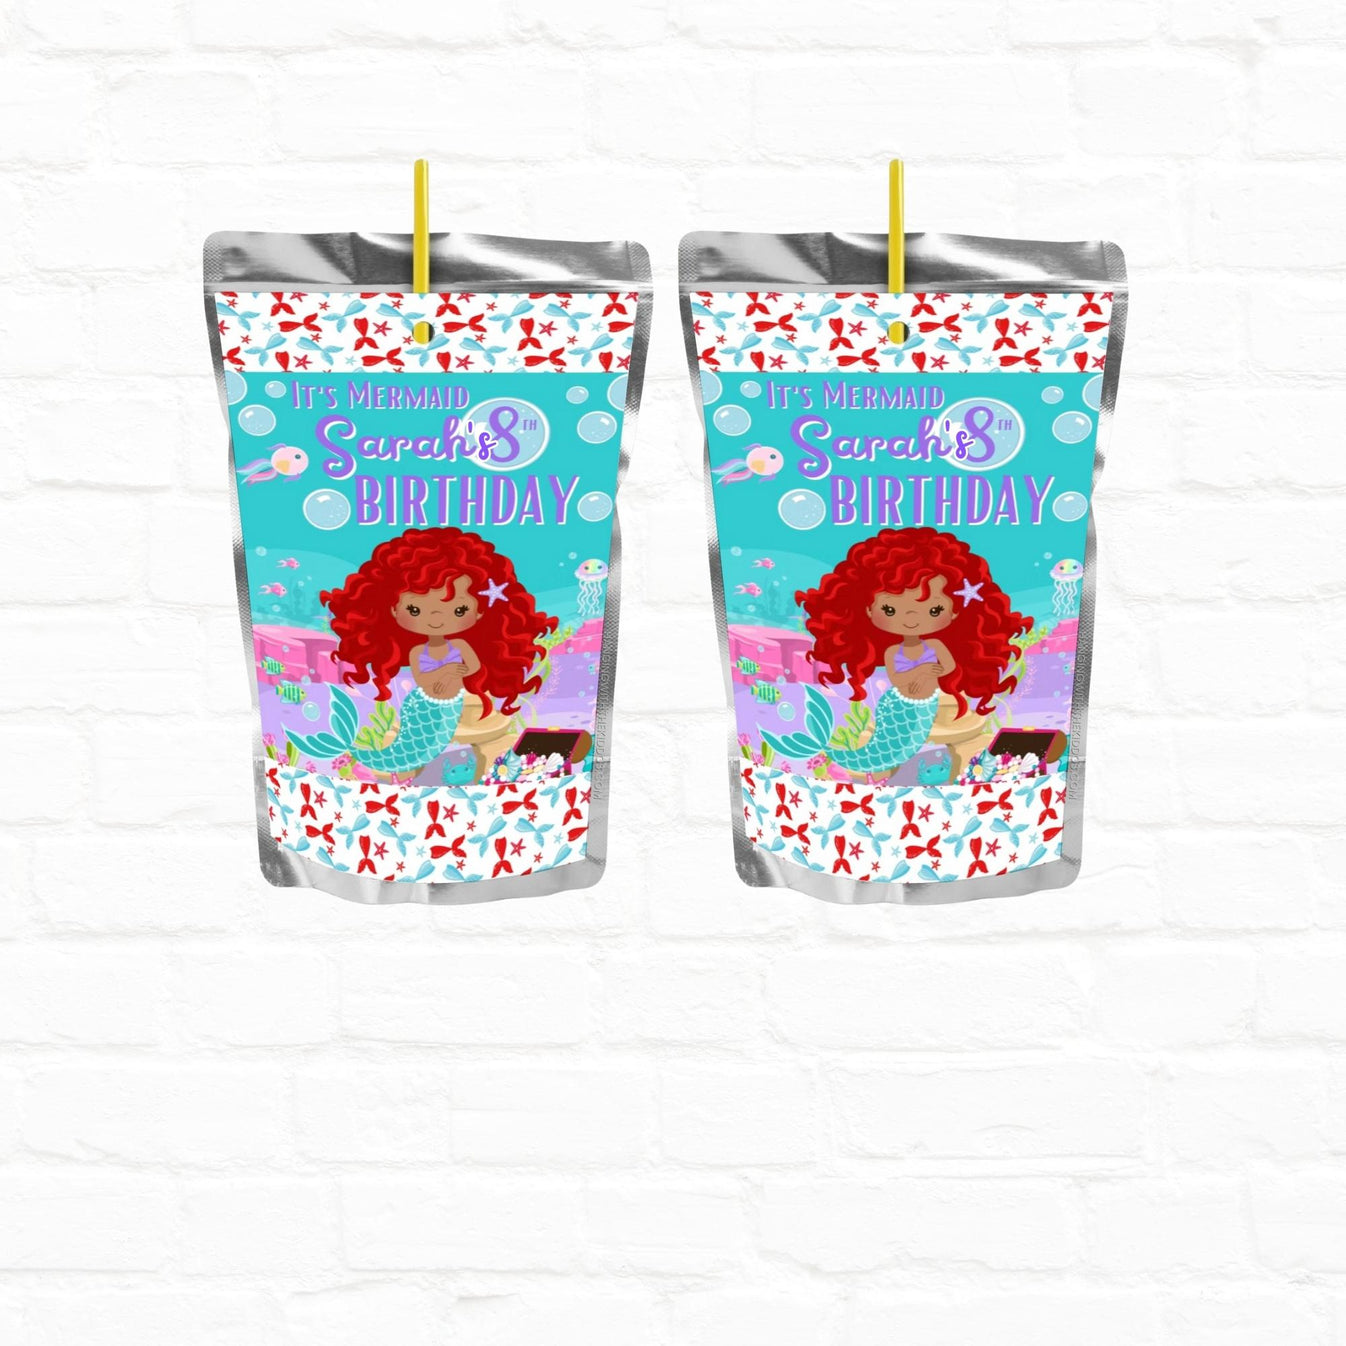 Little Mermaid Birthday Personalized Juice Pouch Labels